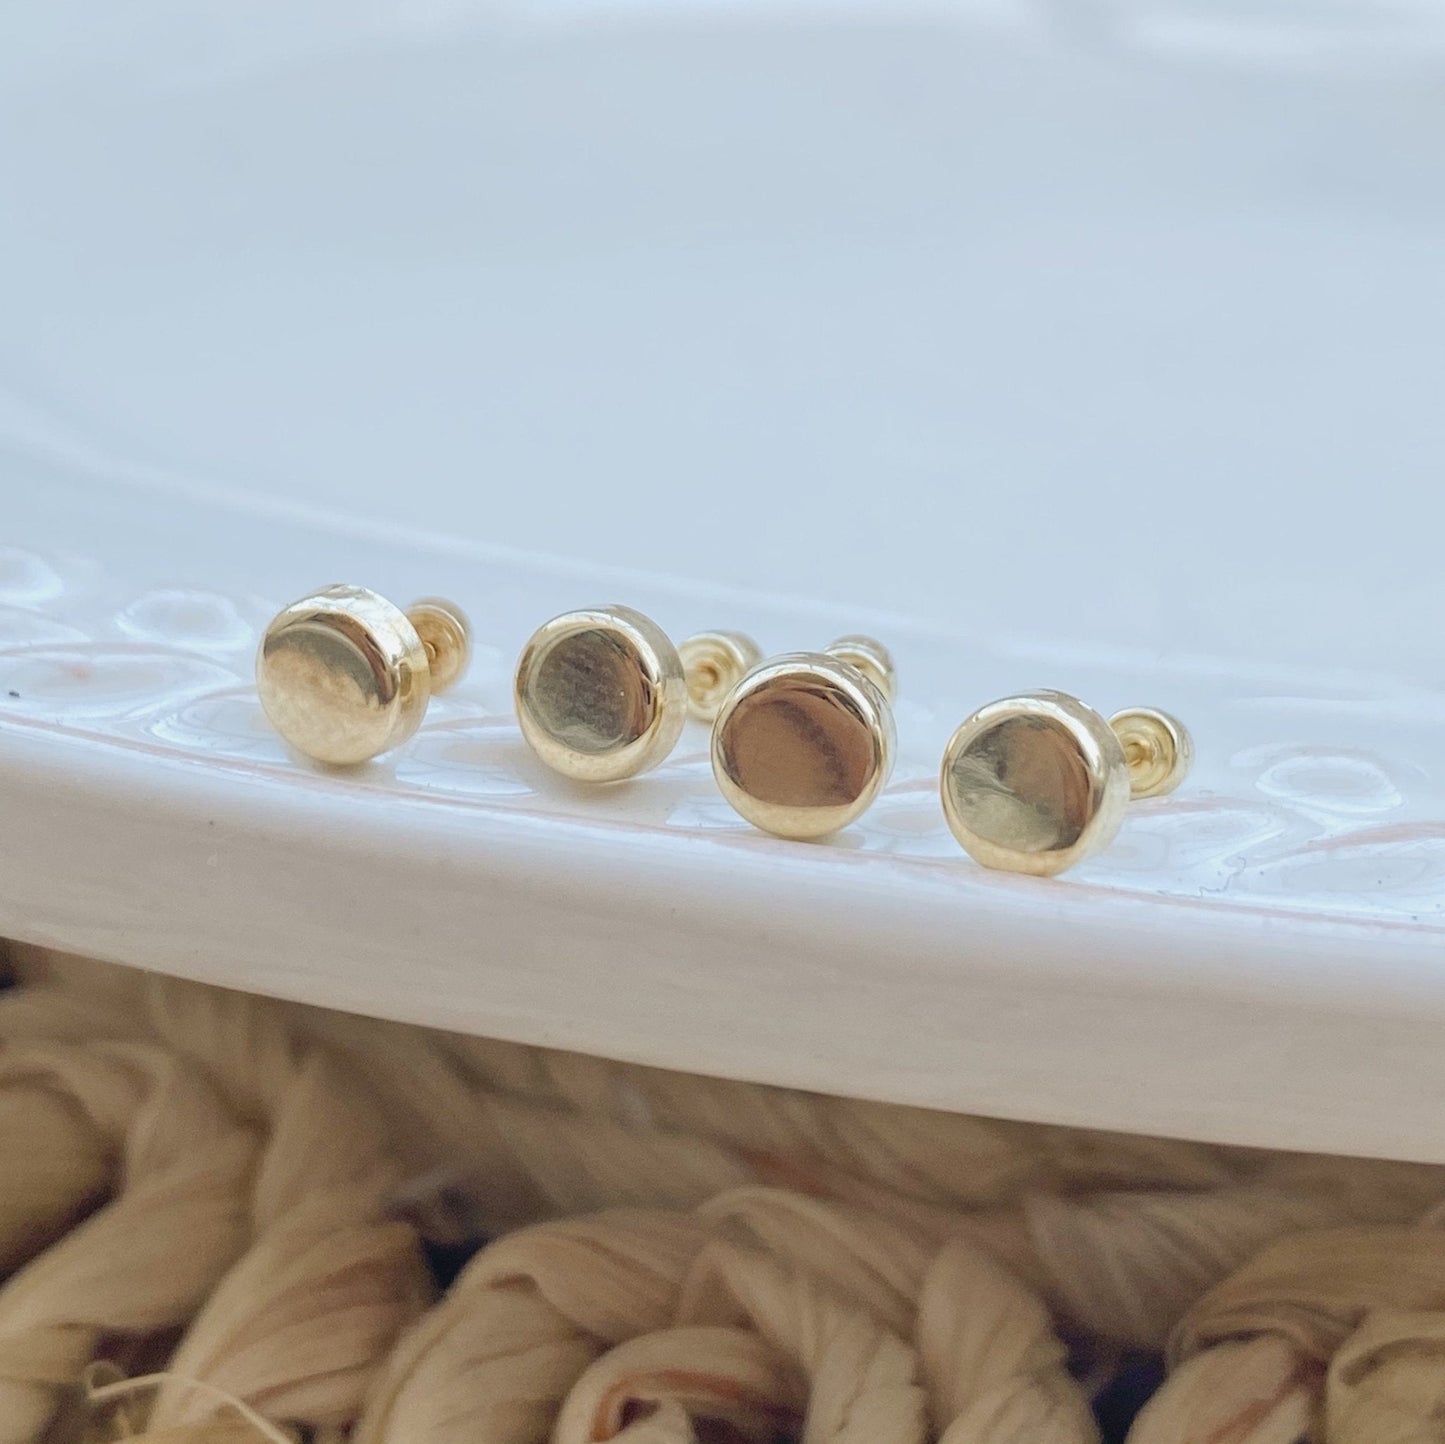 These 10K solid gold dot studs are a go-to pair of earrings. They're minimal and simple, with a touch of sparkle, making them perfect for everyday wear.